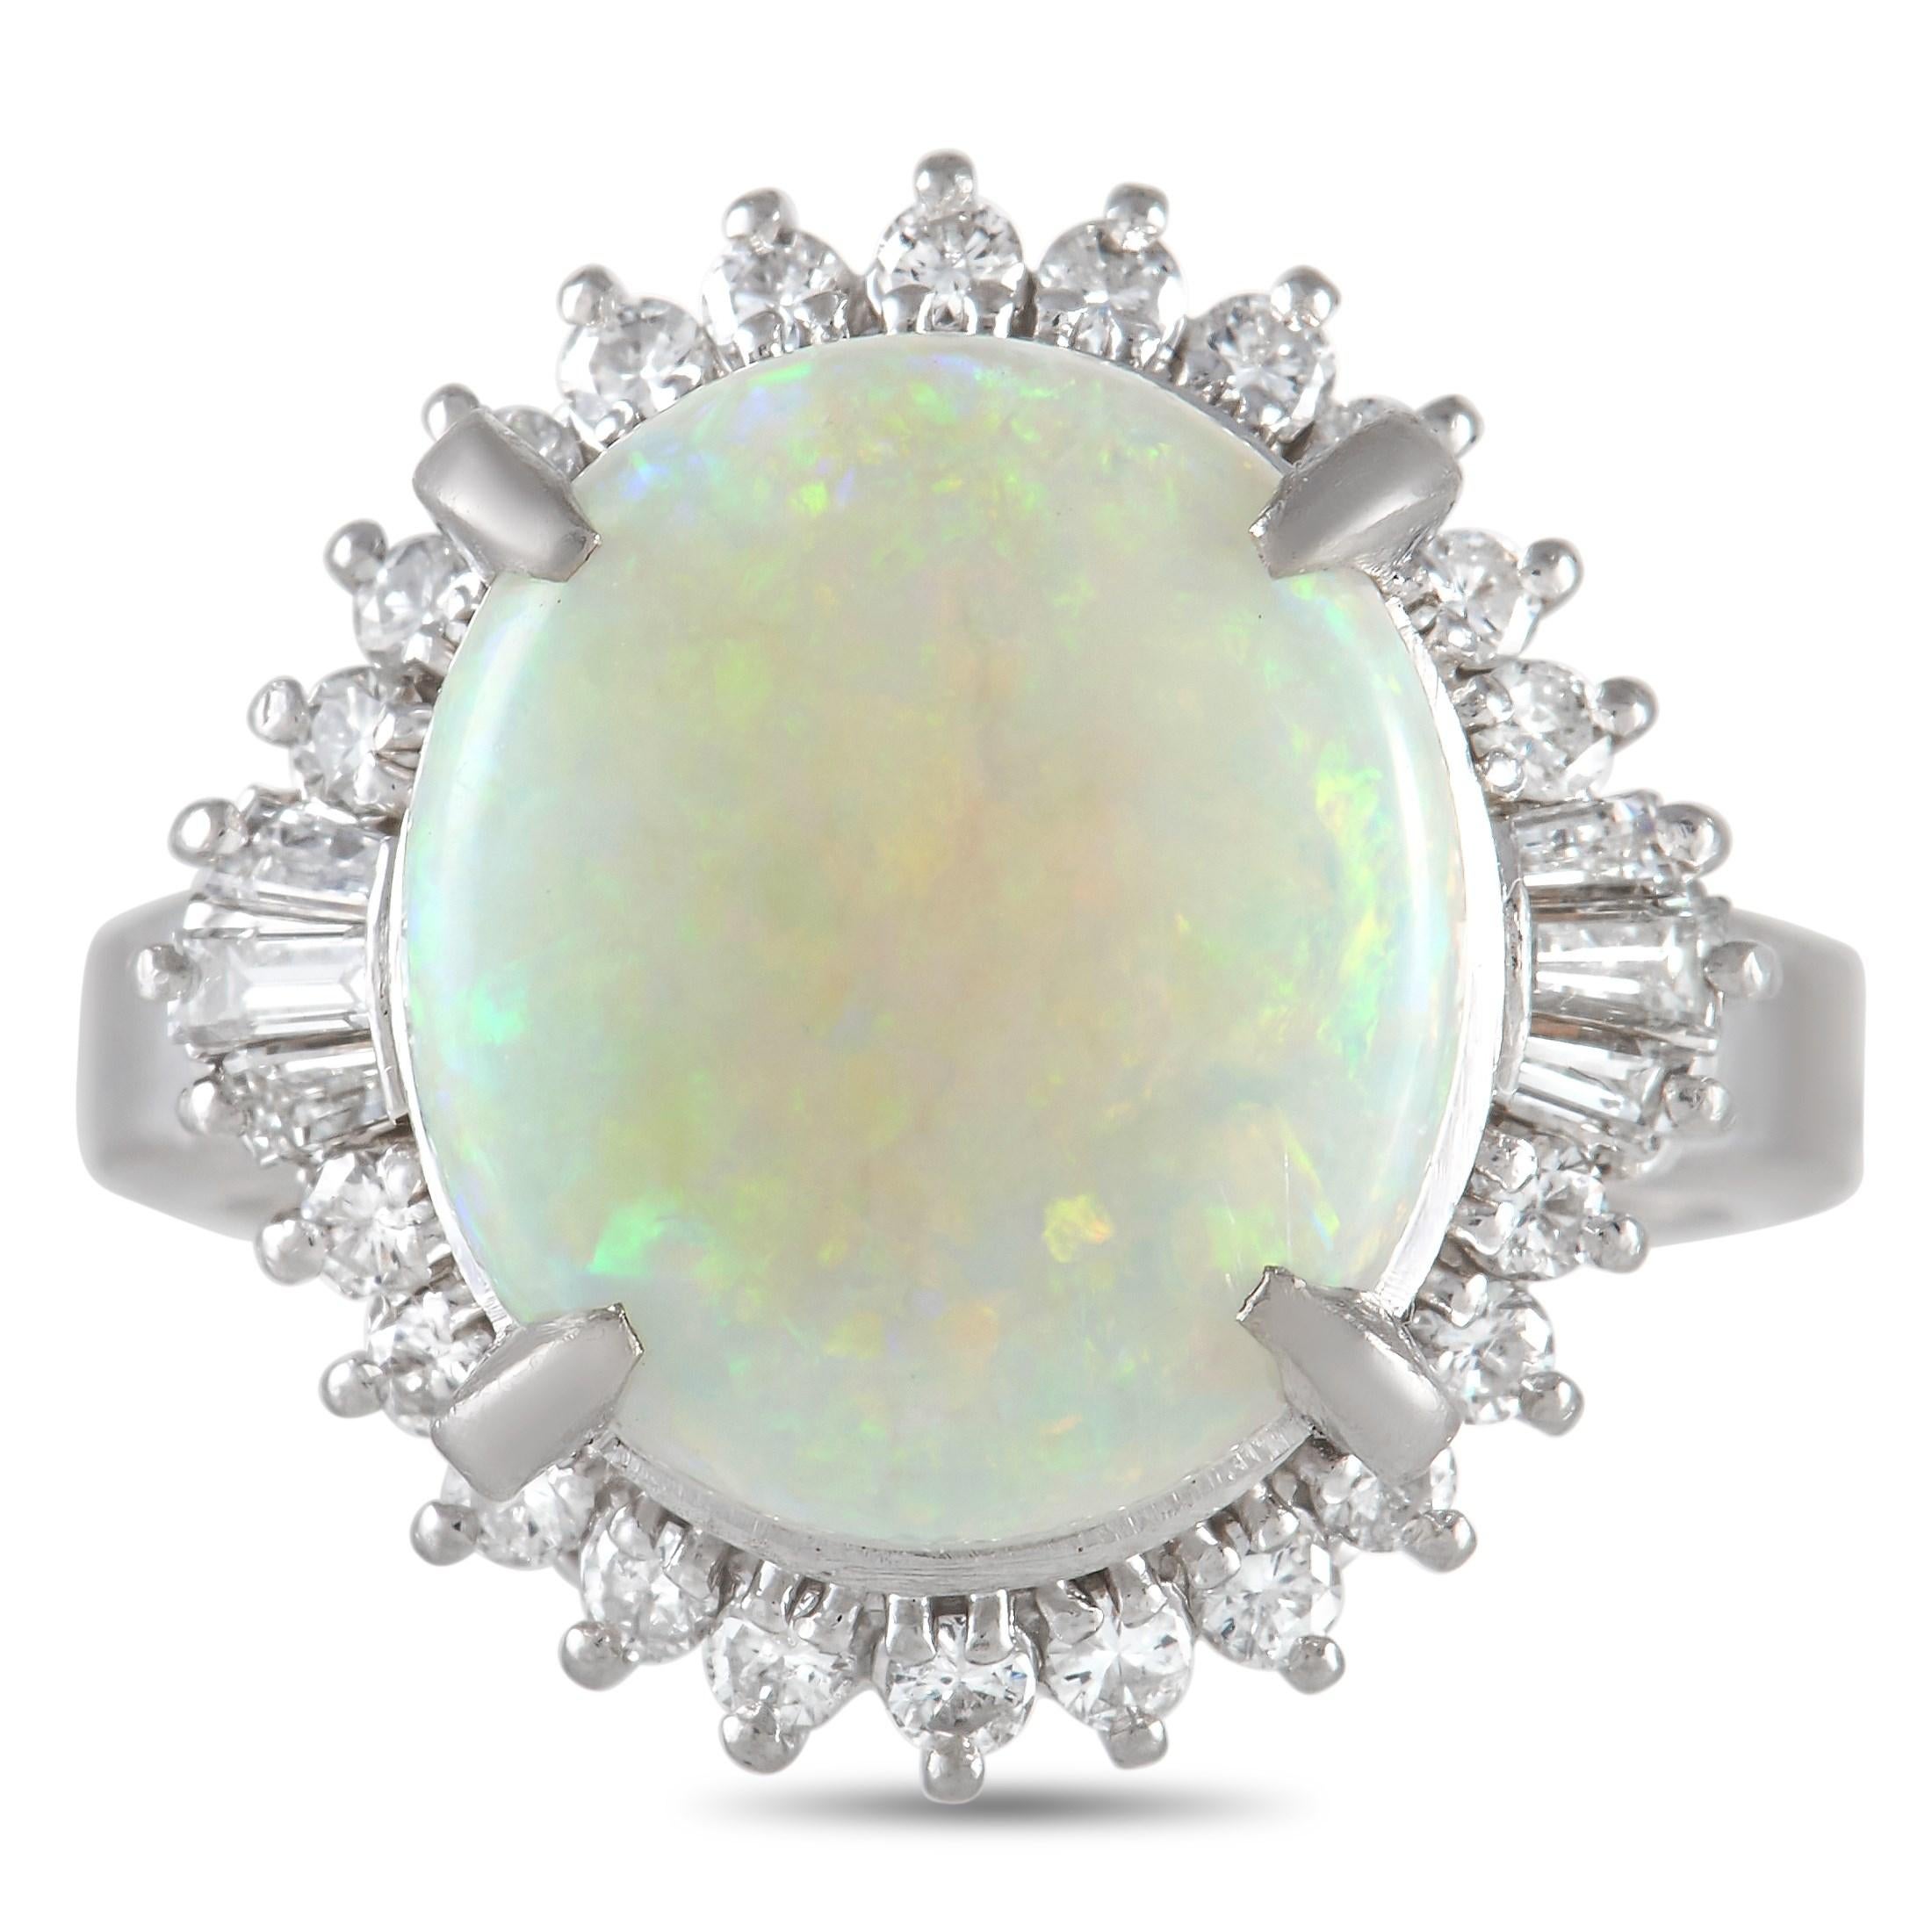 Mixed Cut LB Exclusive Platinum 0.57 Ct Diamond and Opal Ring